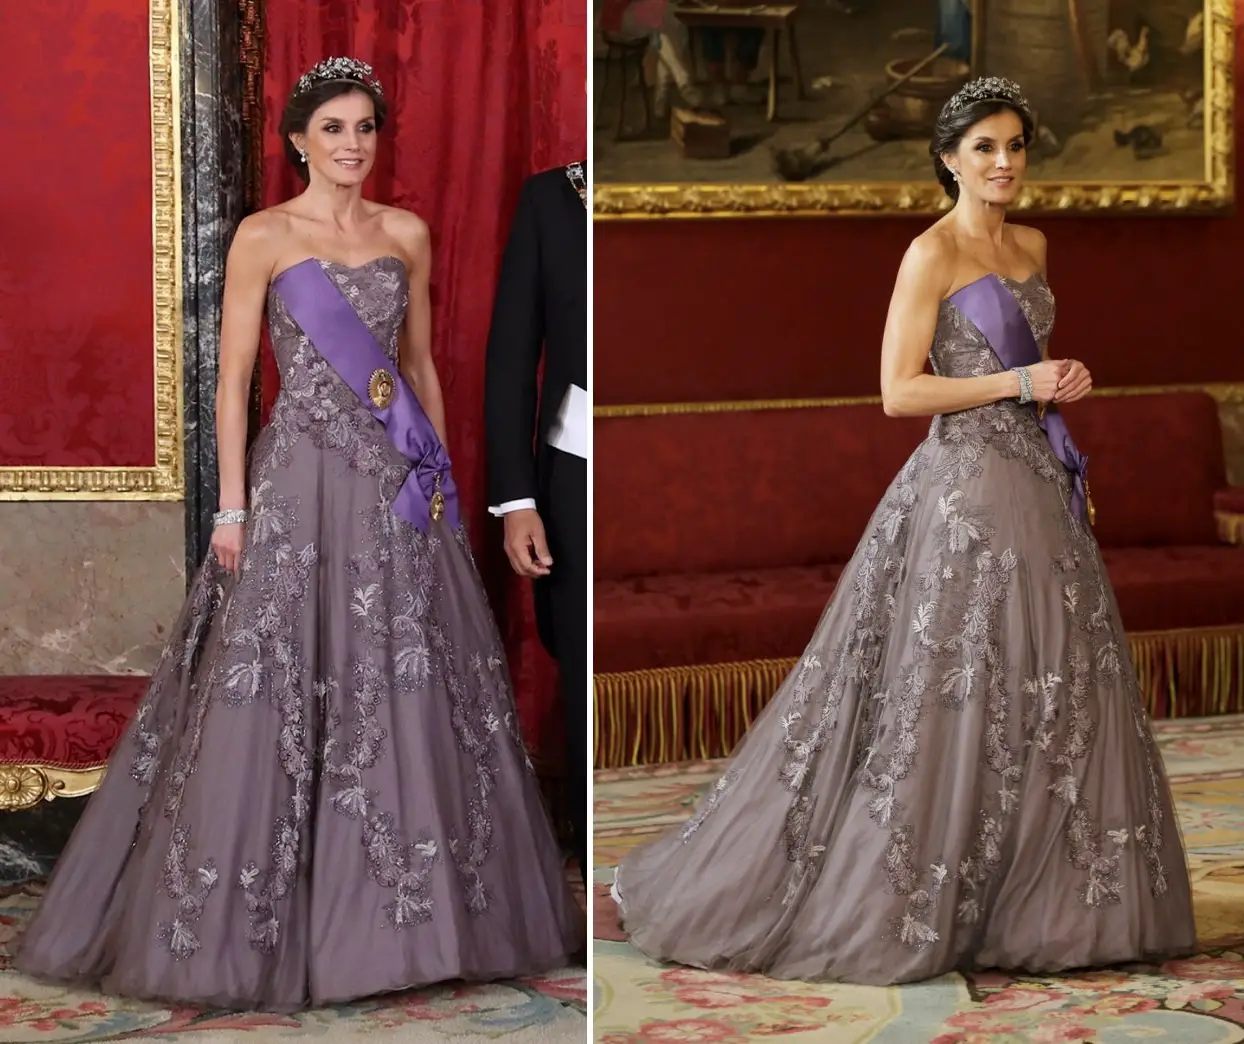 Letizia chose a beautiful gown last night that she first wore at the pre-wedding reception of Prince William and Catherine hosted by Queen Elizabeth II for the Royal Family guests from other Monarchies.